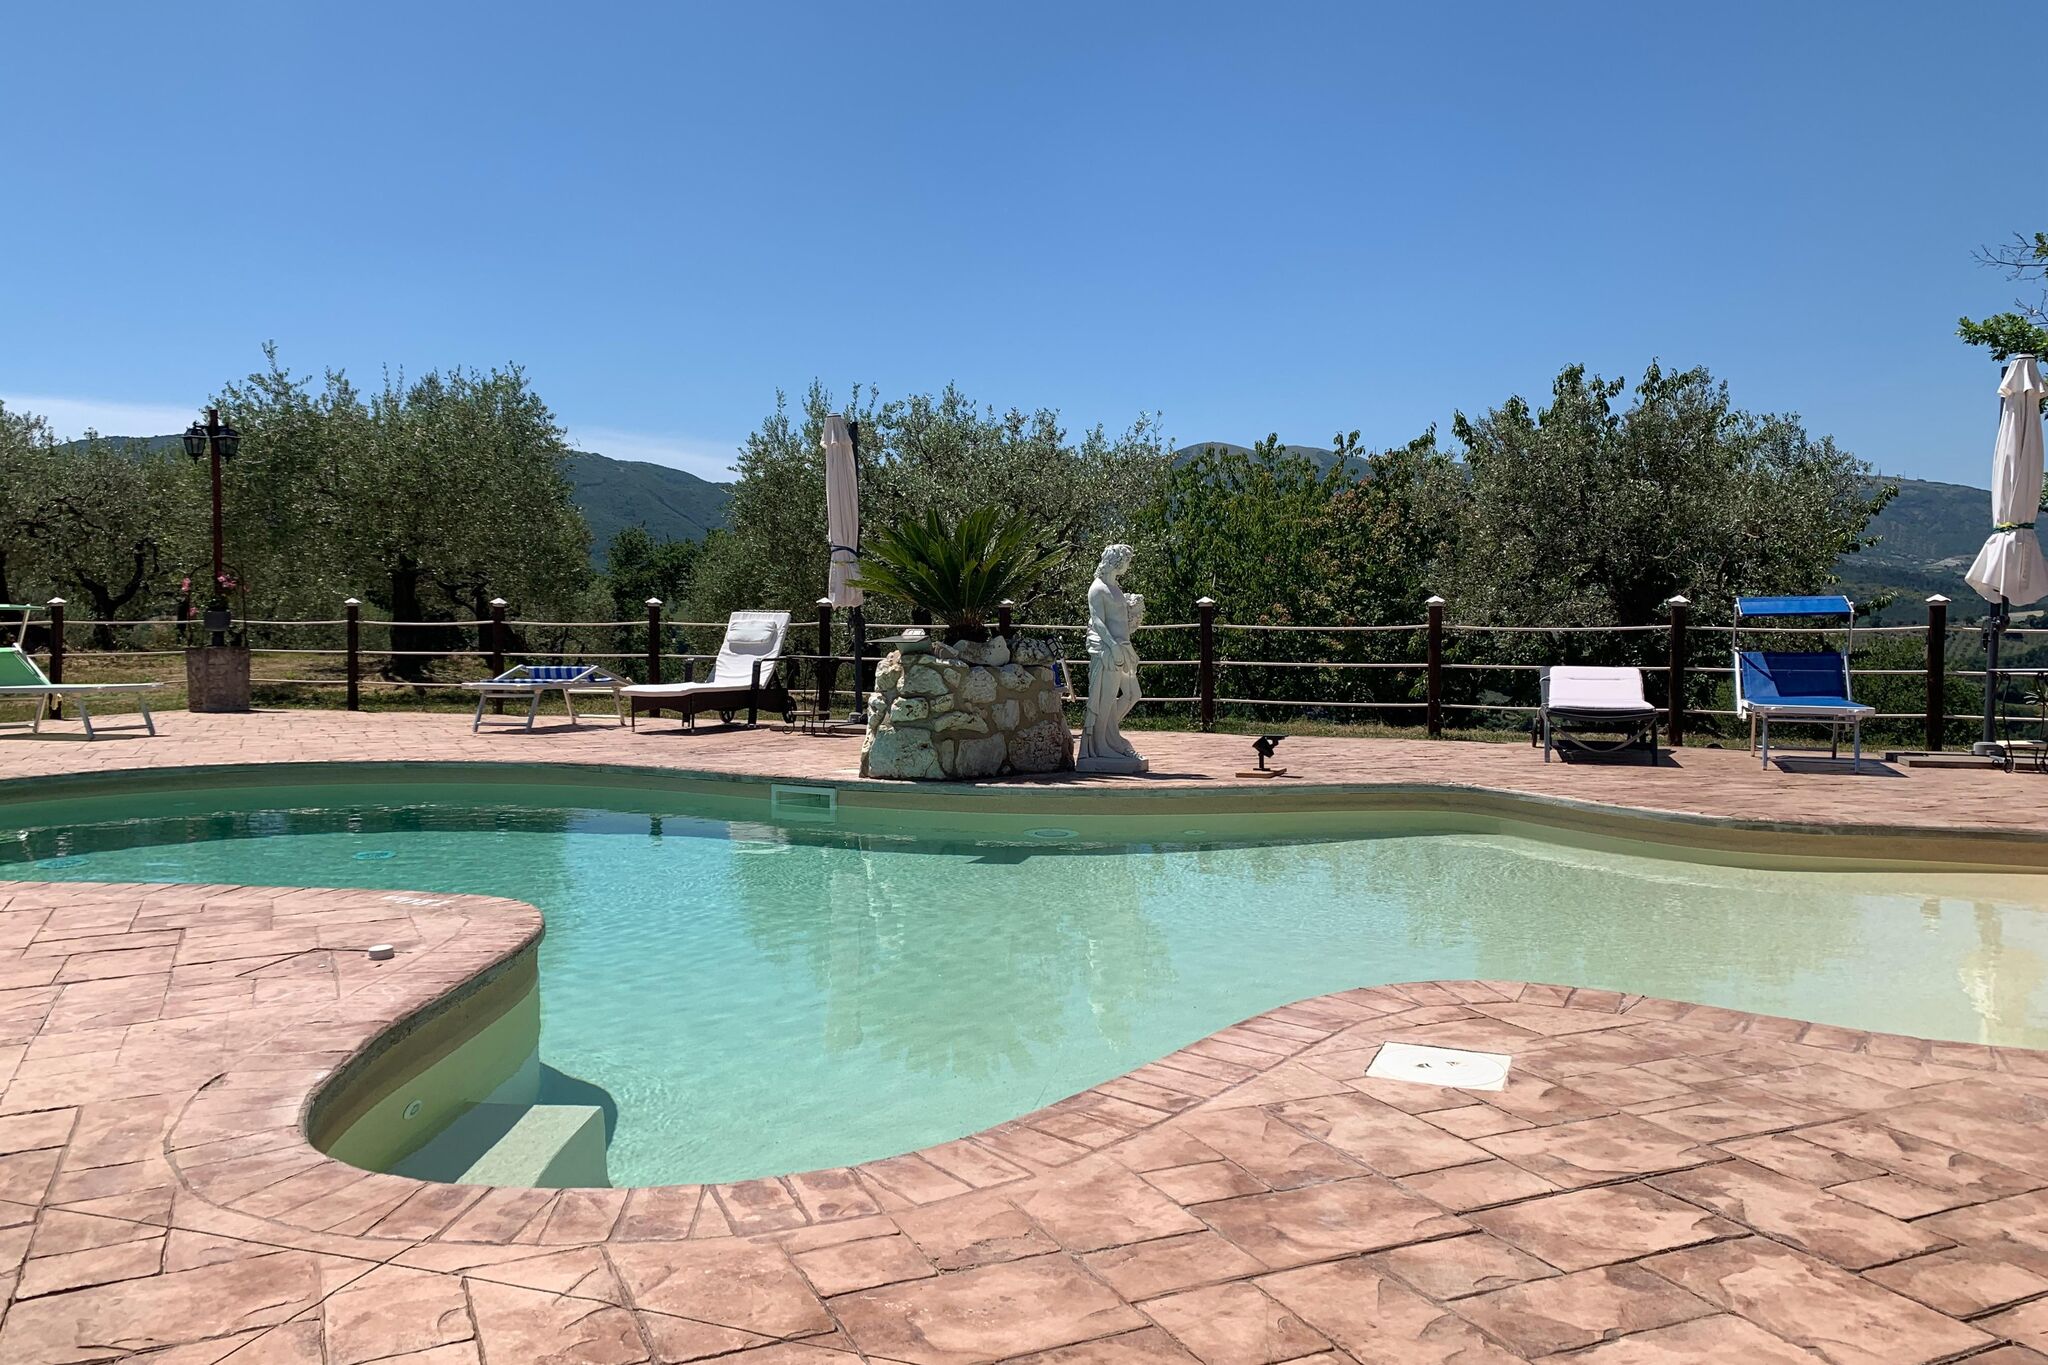 Picturesque farmhouse in Spoleto with swimming pool